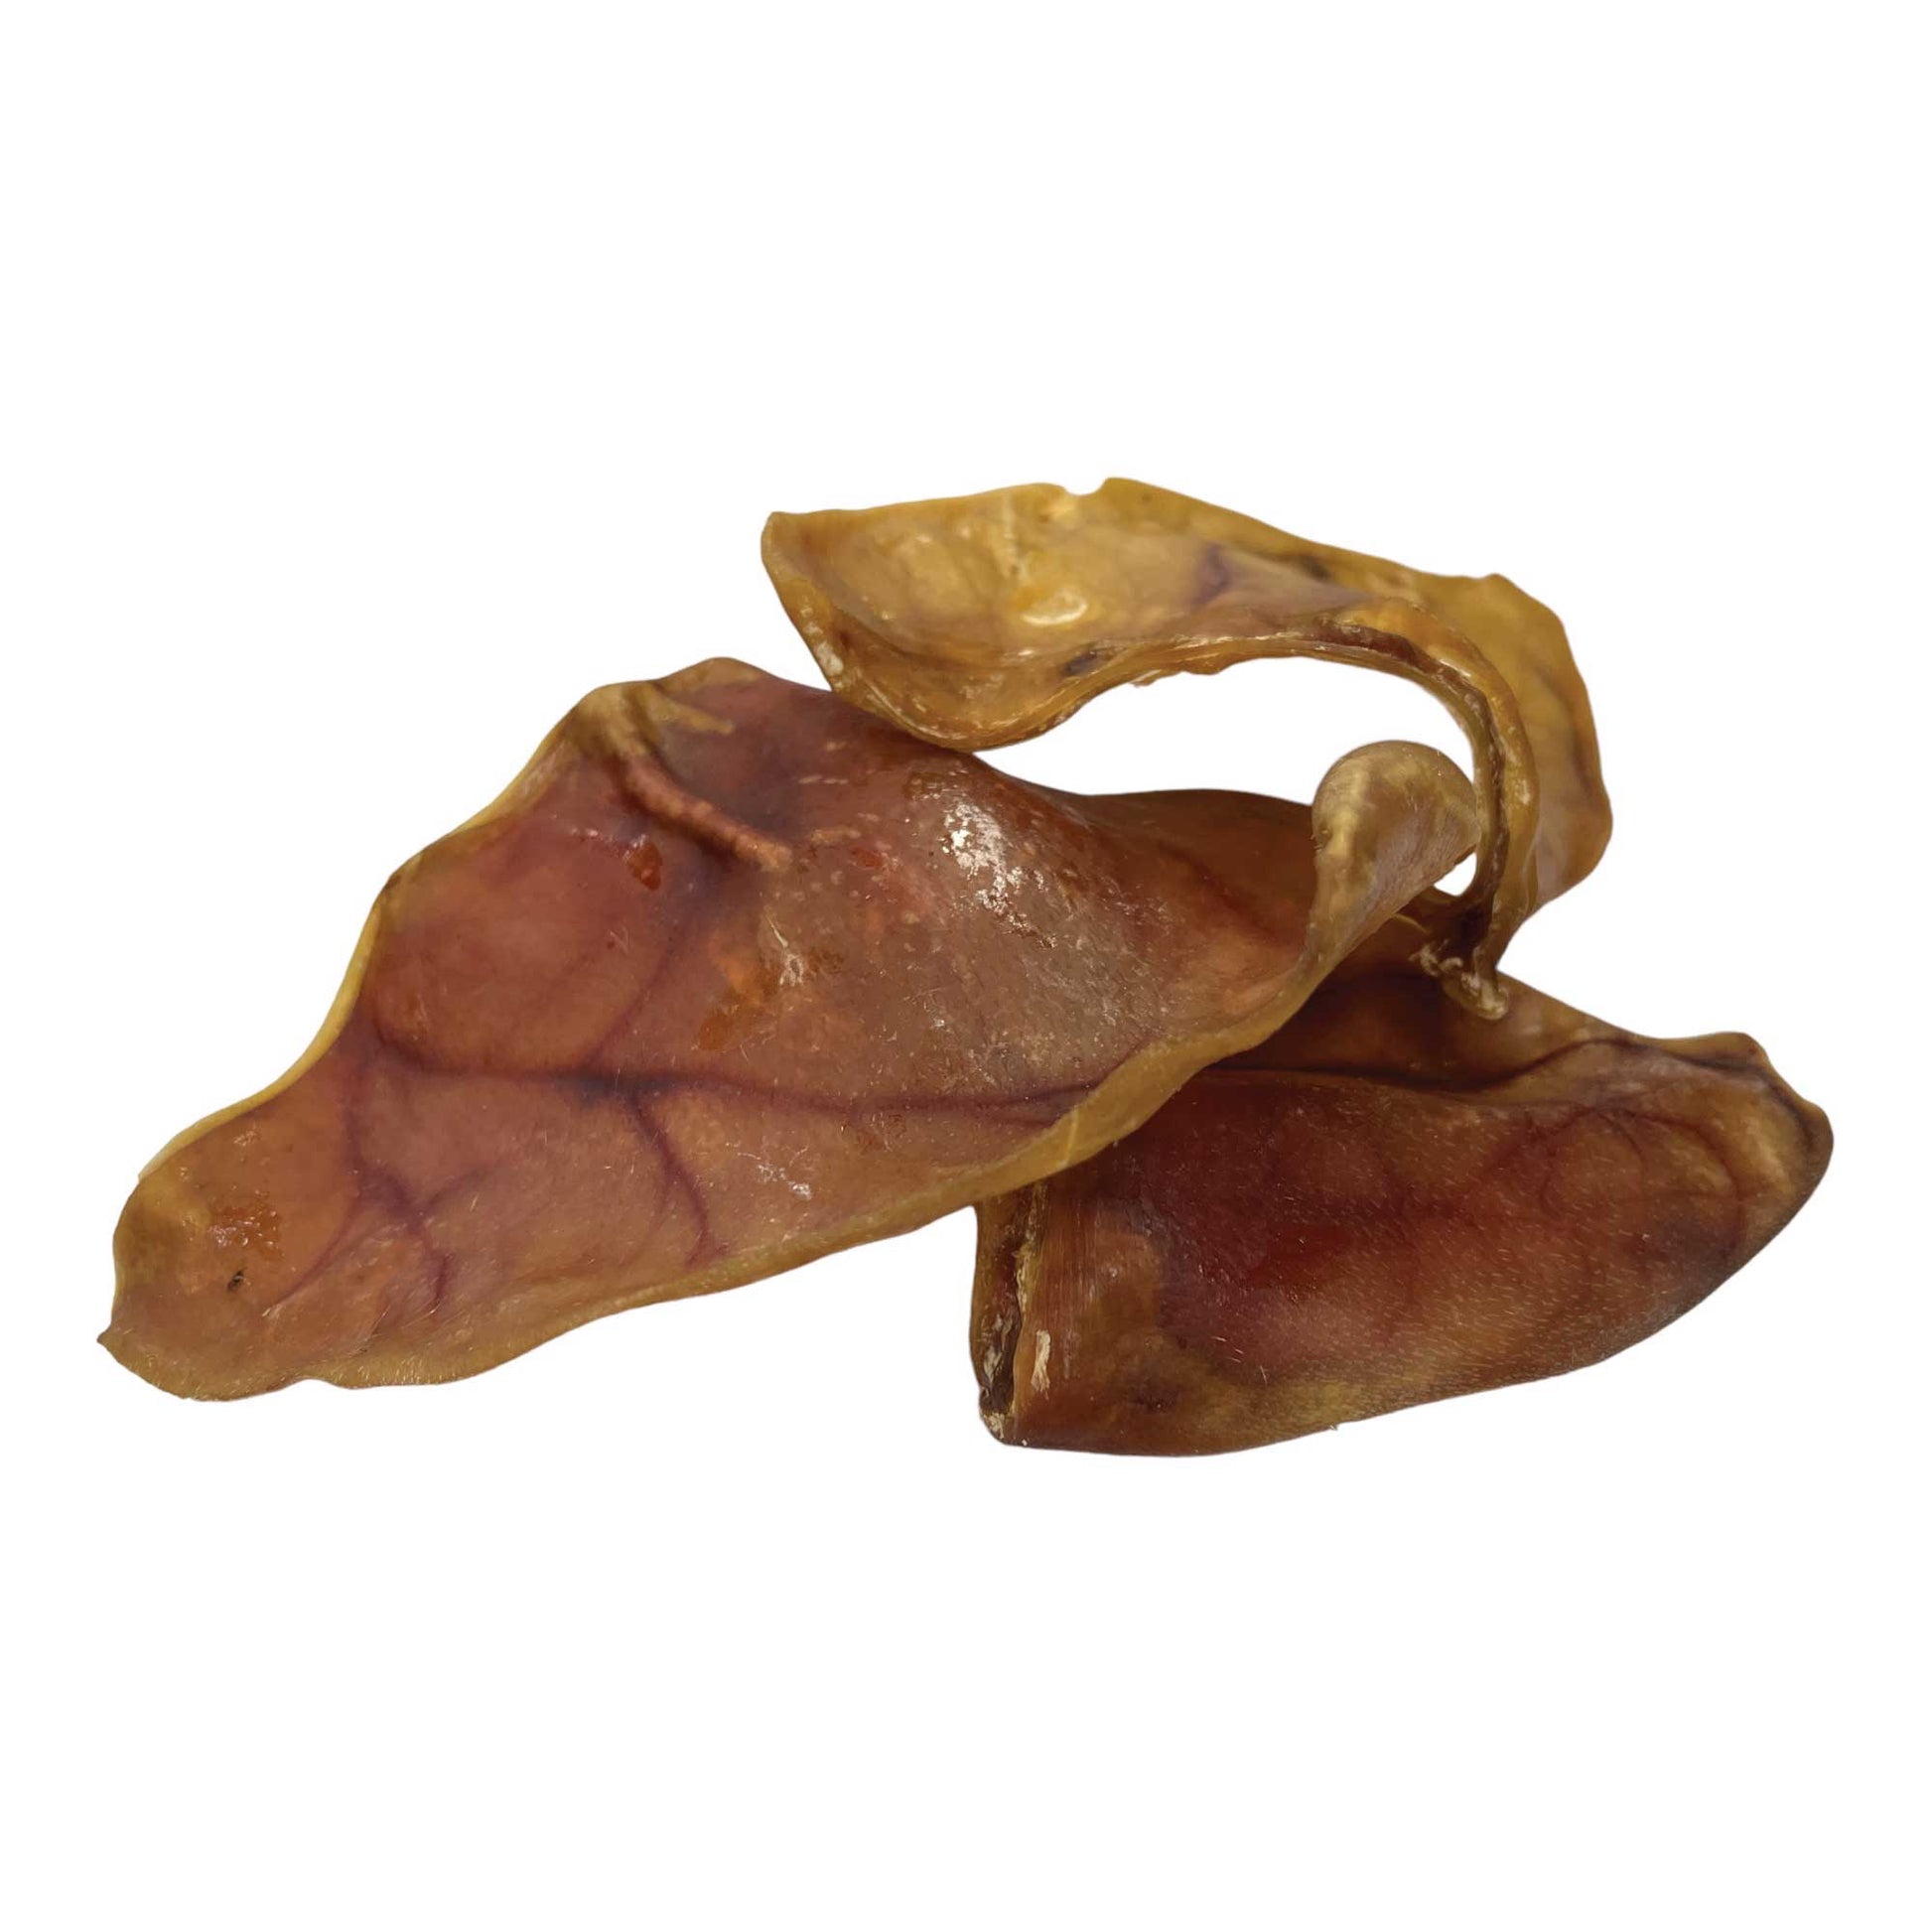 100x Dog Treat Large Pig Ears Whole - Dehydrated Australian Healthy Puppy Chew